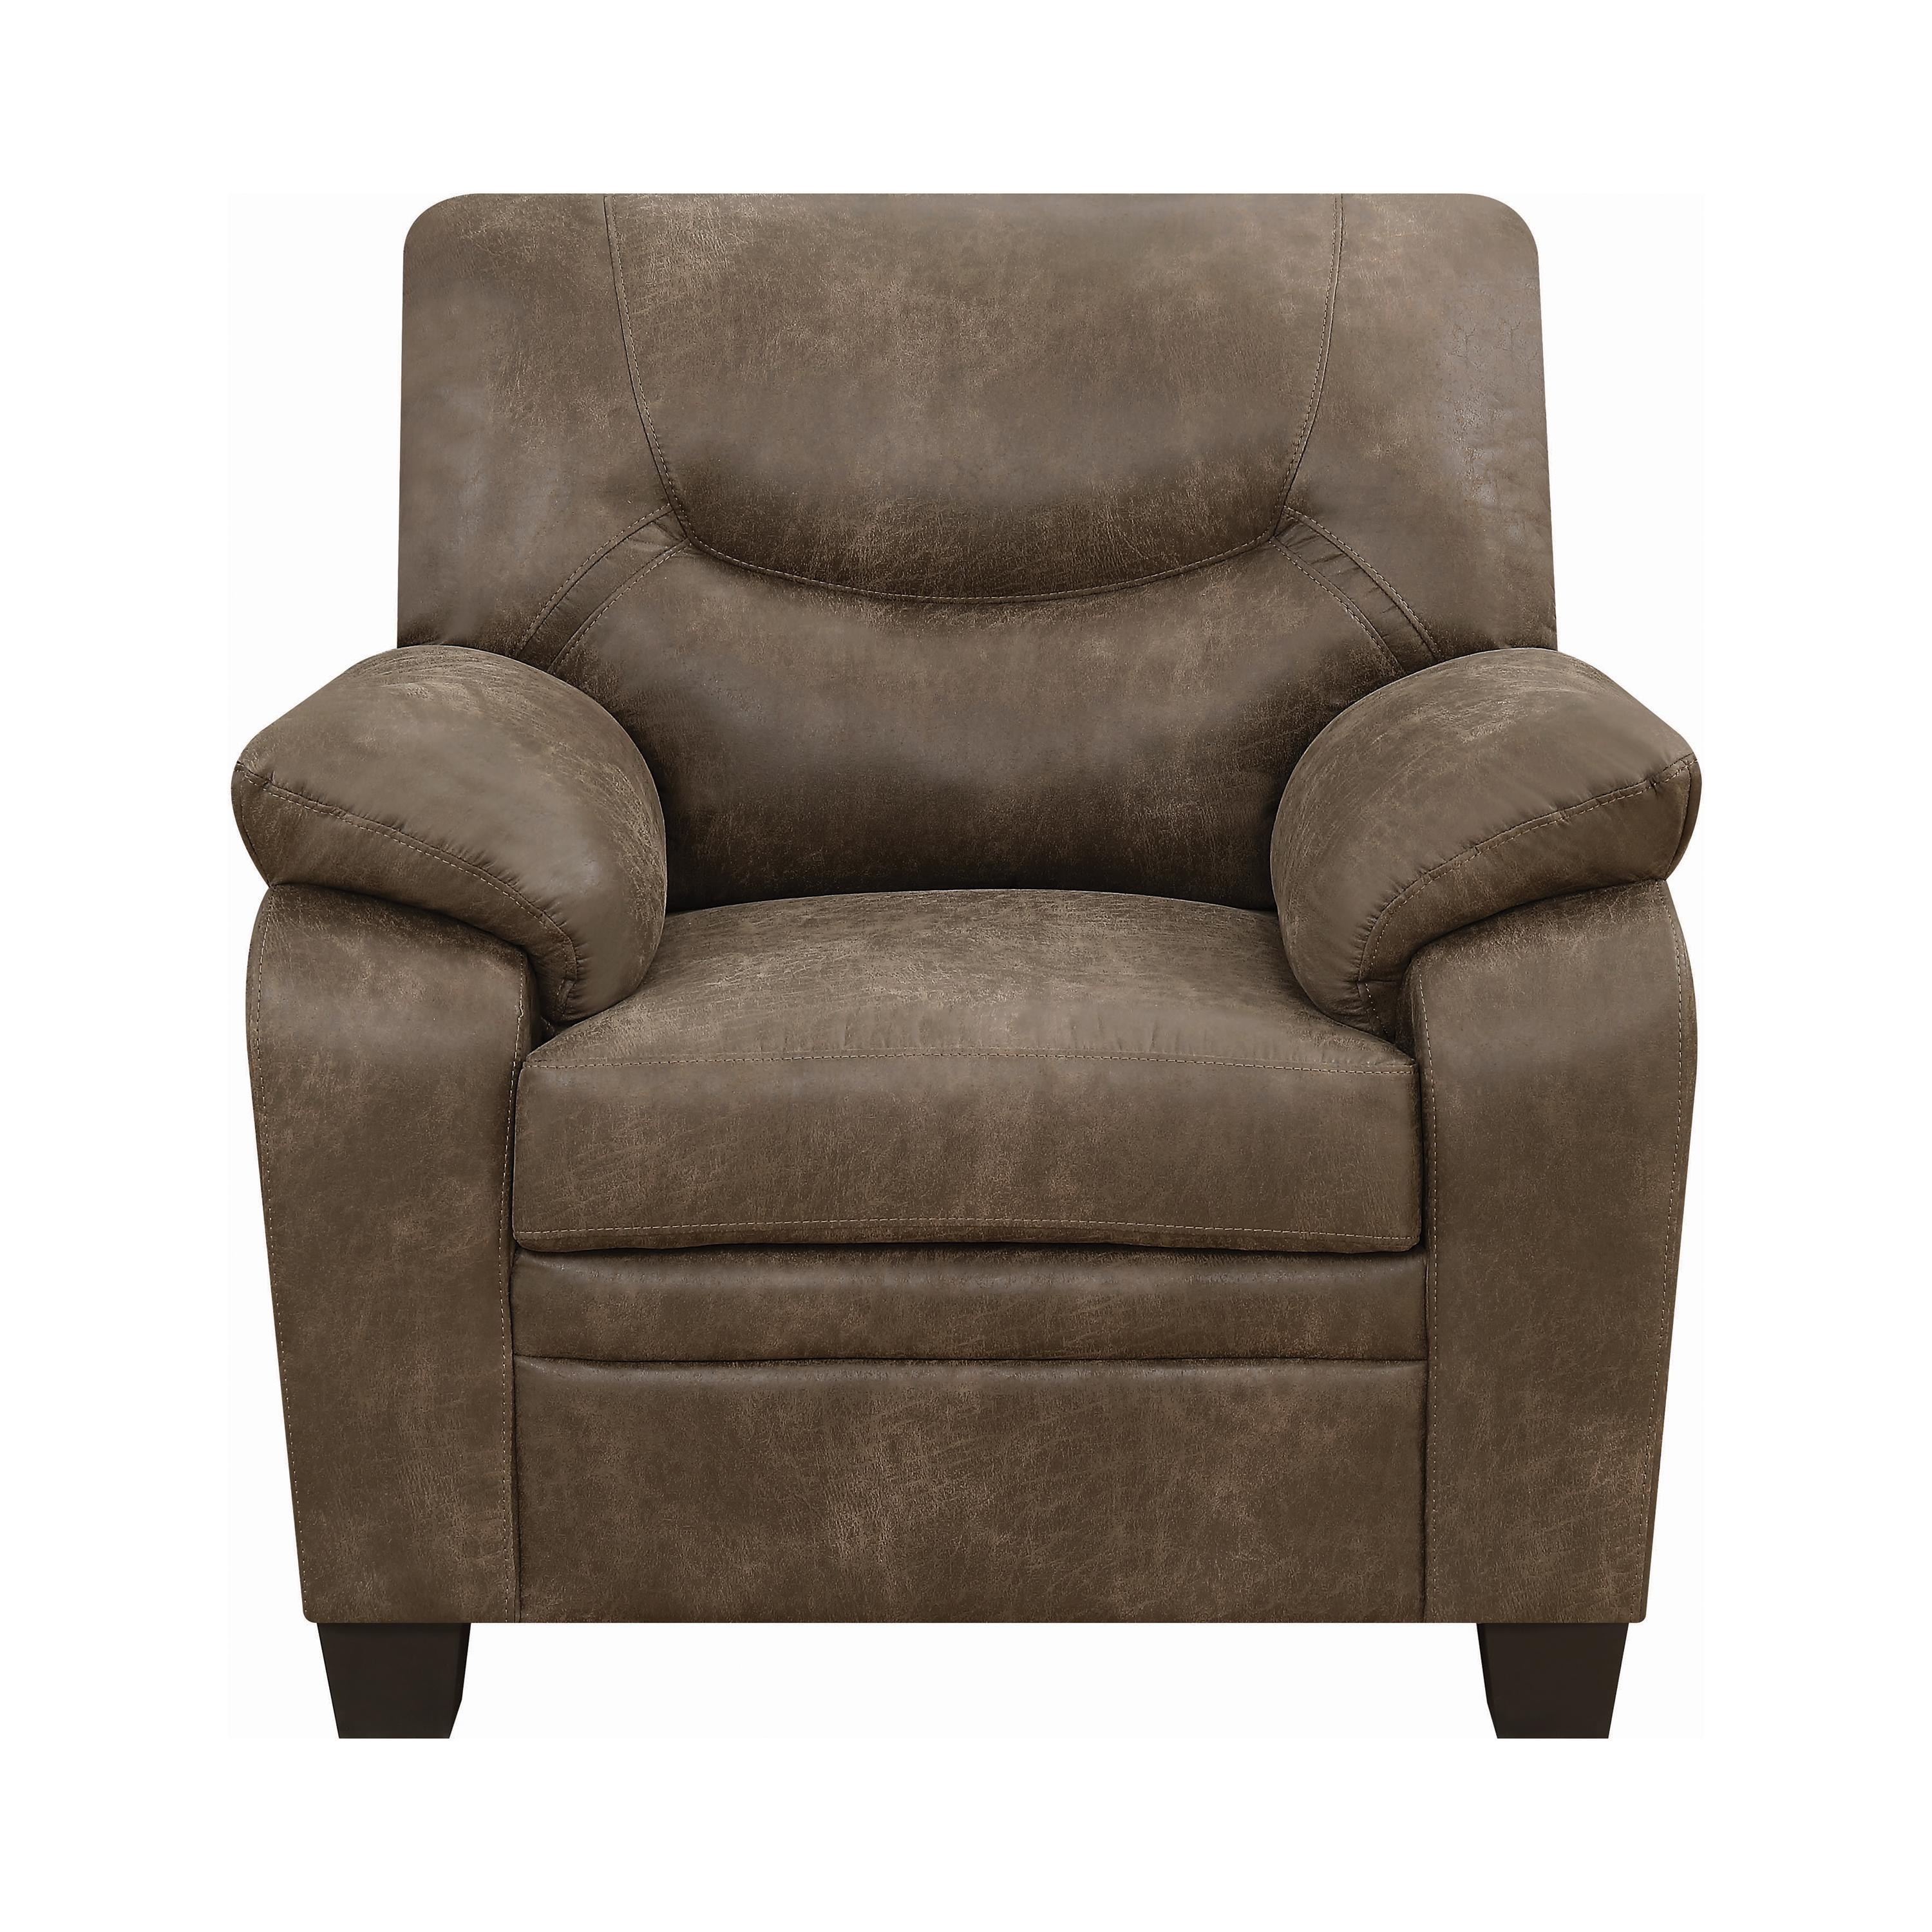 Classic Arm Chair 506563 Meagan 506563 in Brown 